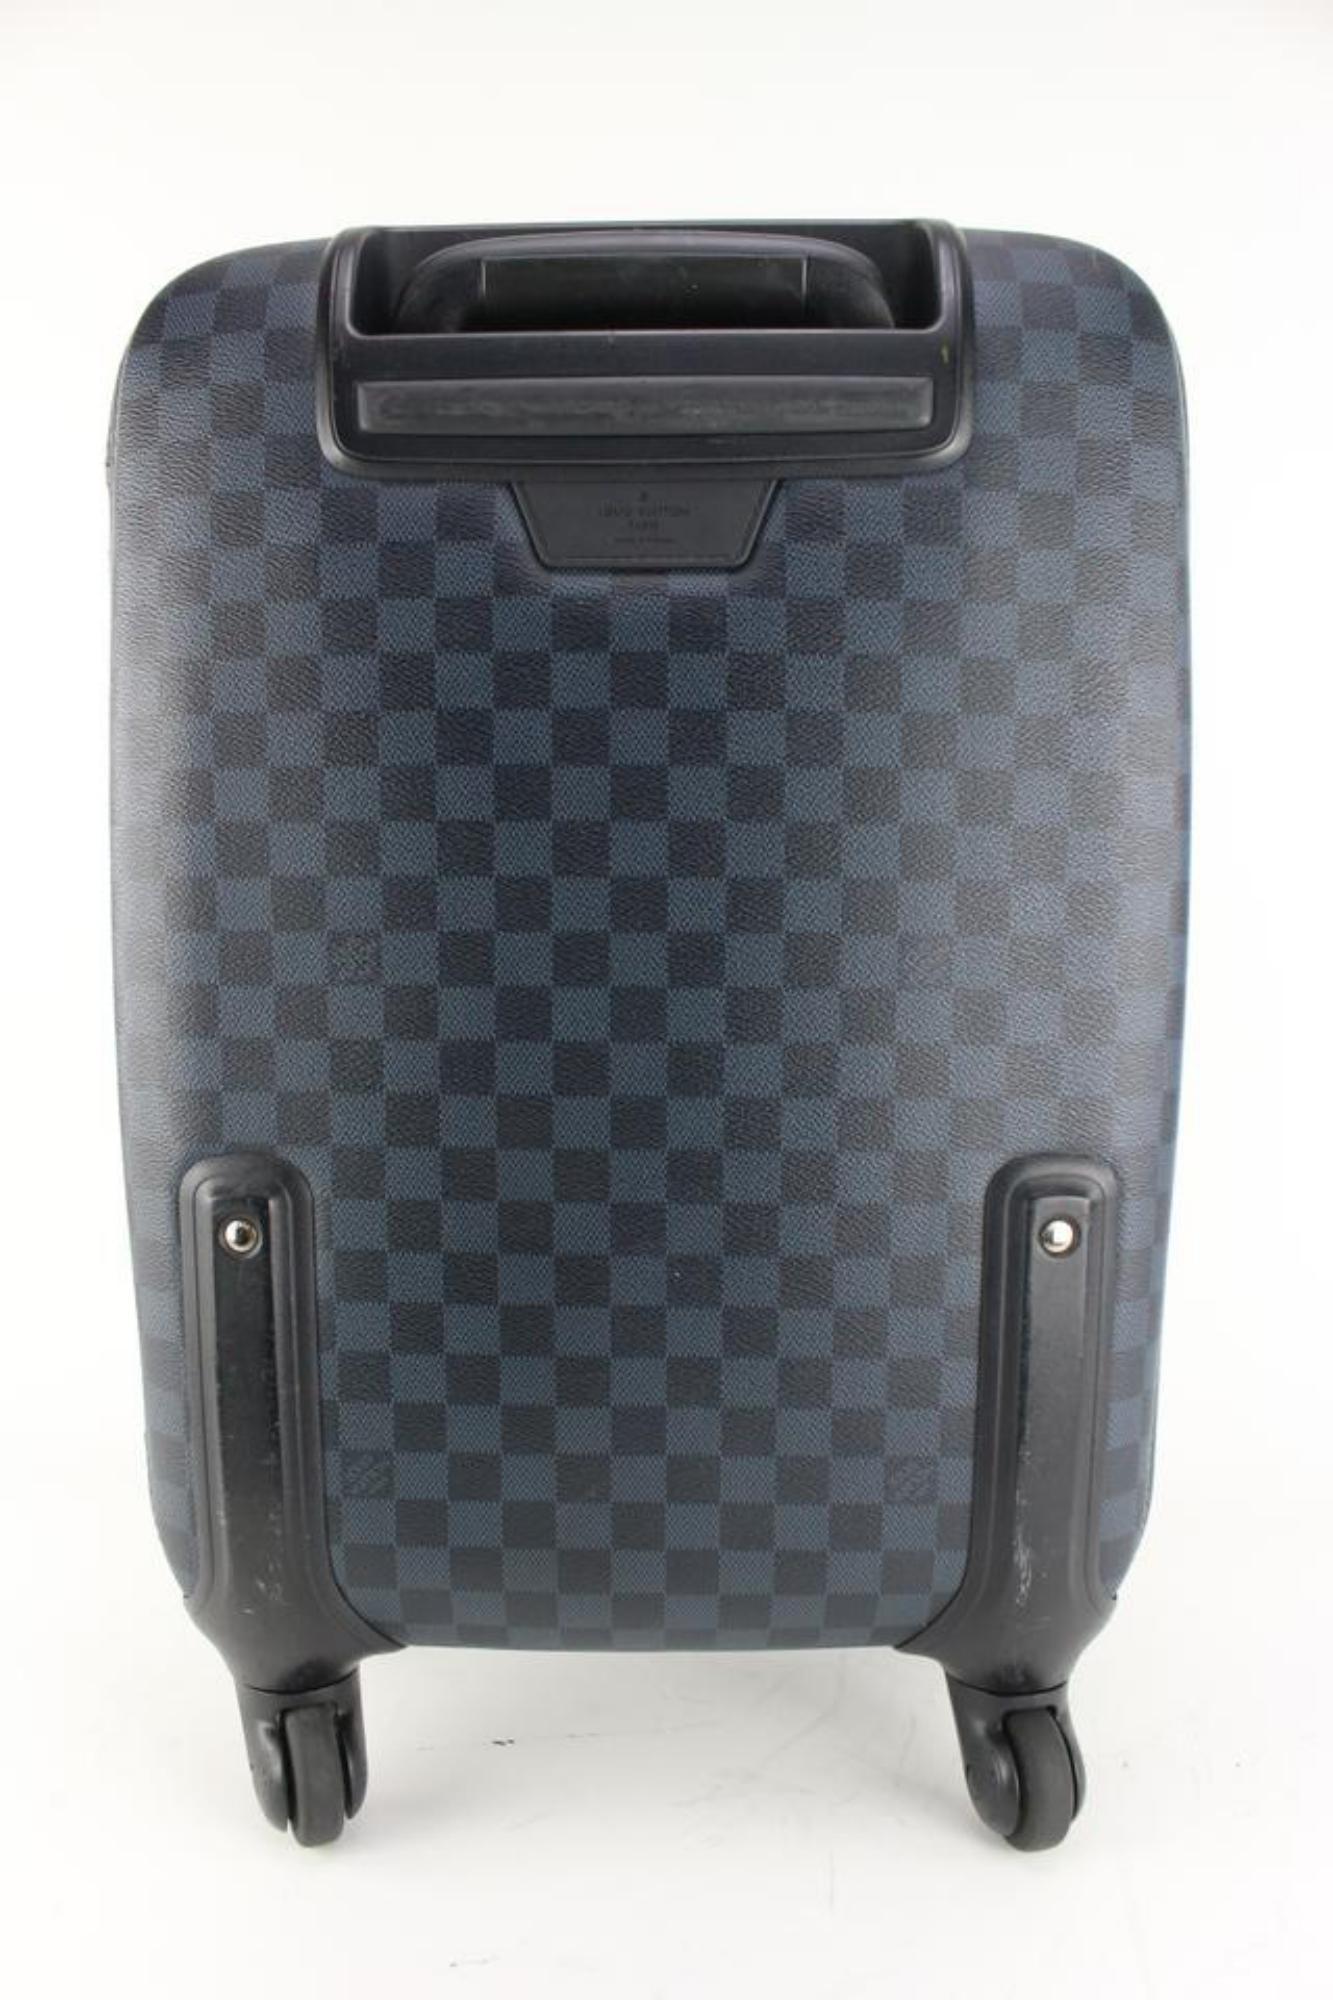 Louis Vuitton Damier Cobalt Zephyr Rolling Luggage Trolley Suitcase 26lz531s In Good Condition For Sale In Dix hills, NY